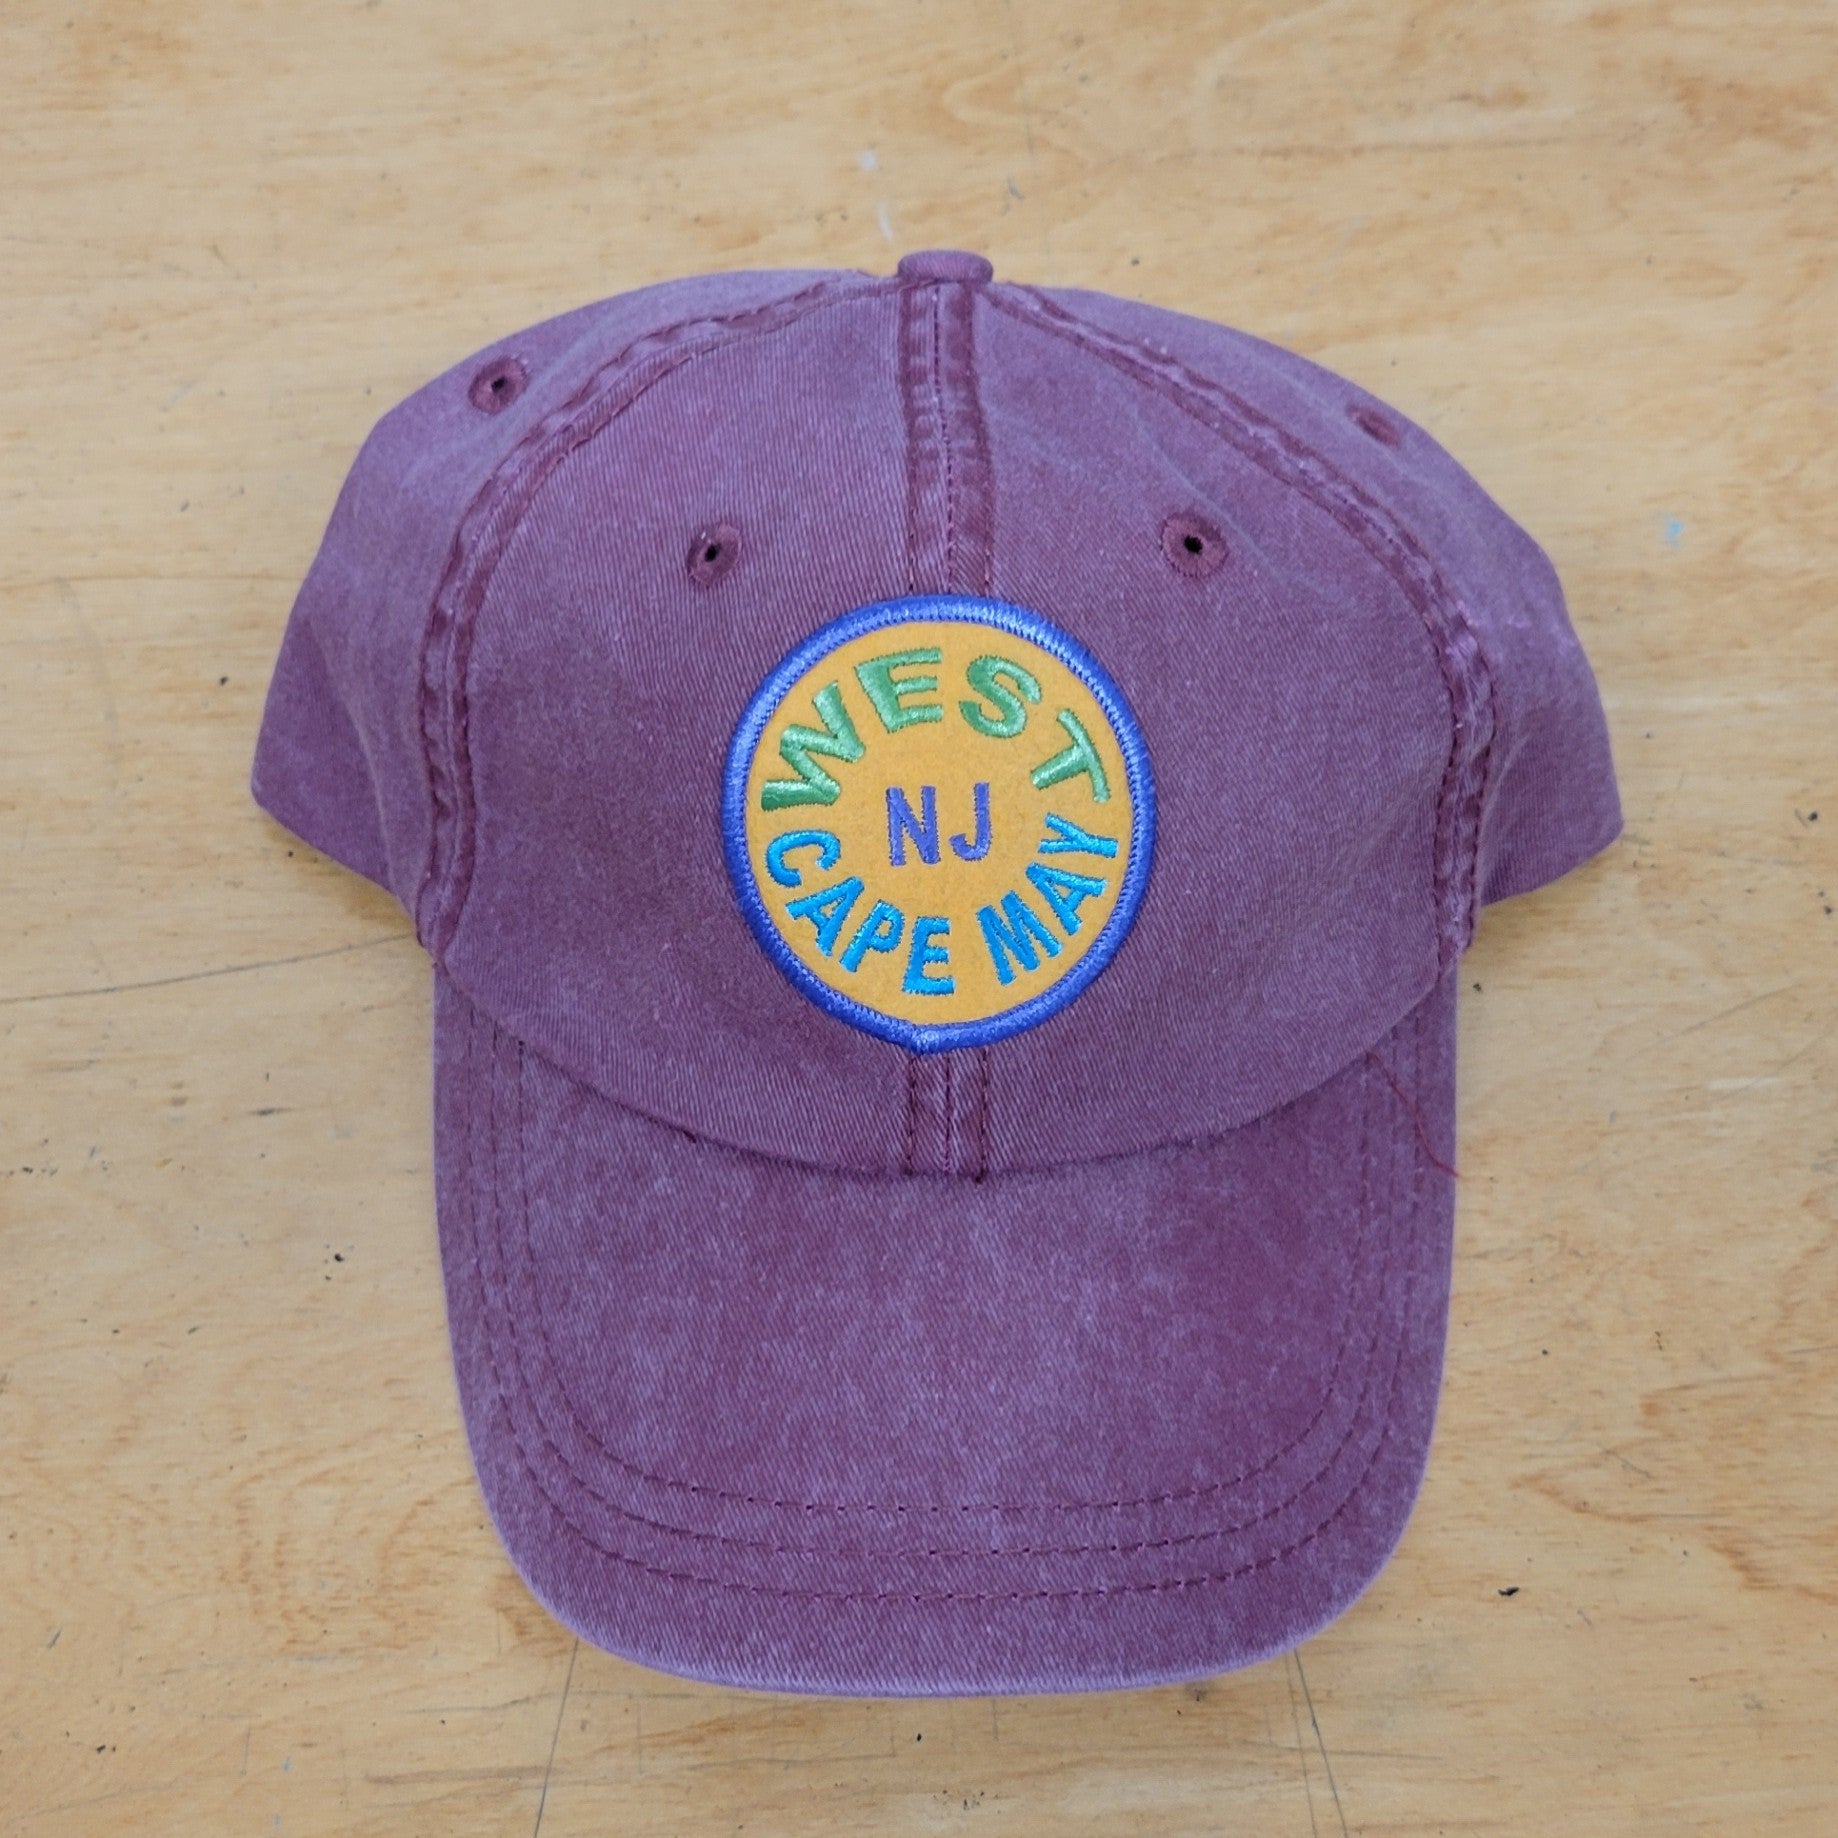 A wine-purple, classic hat with a 'West Cape May' patch on it.